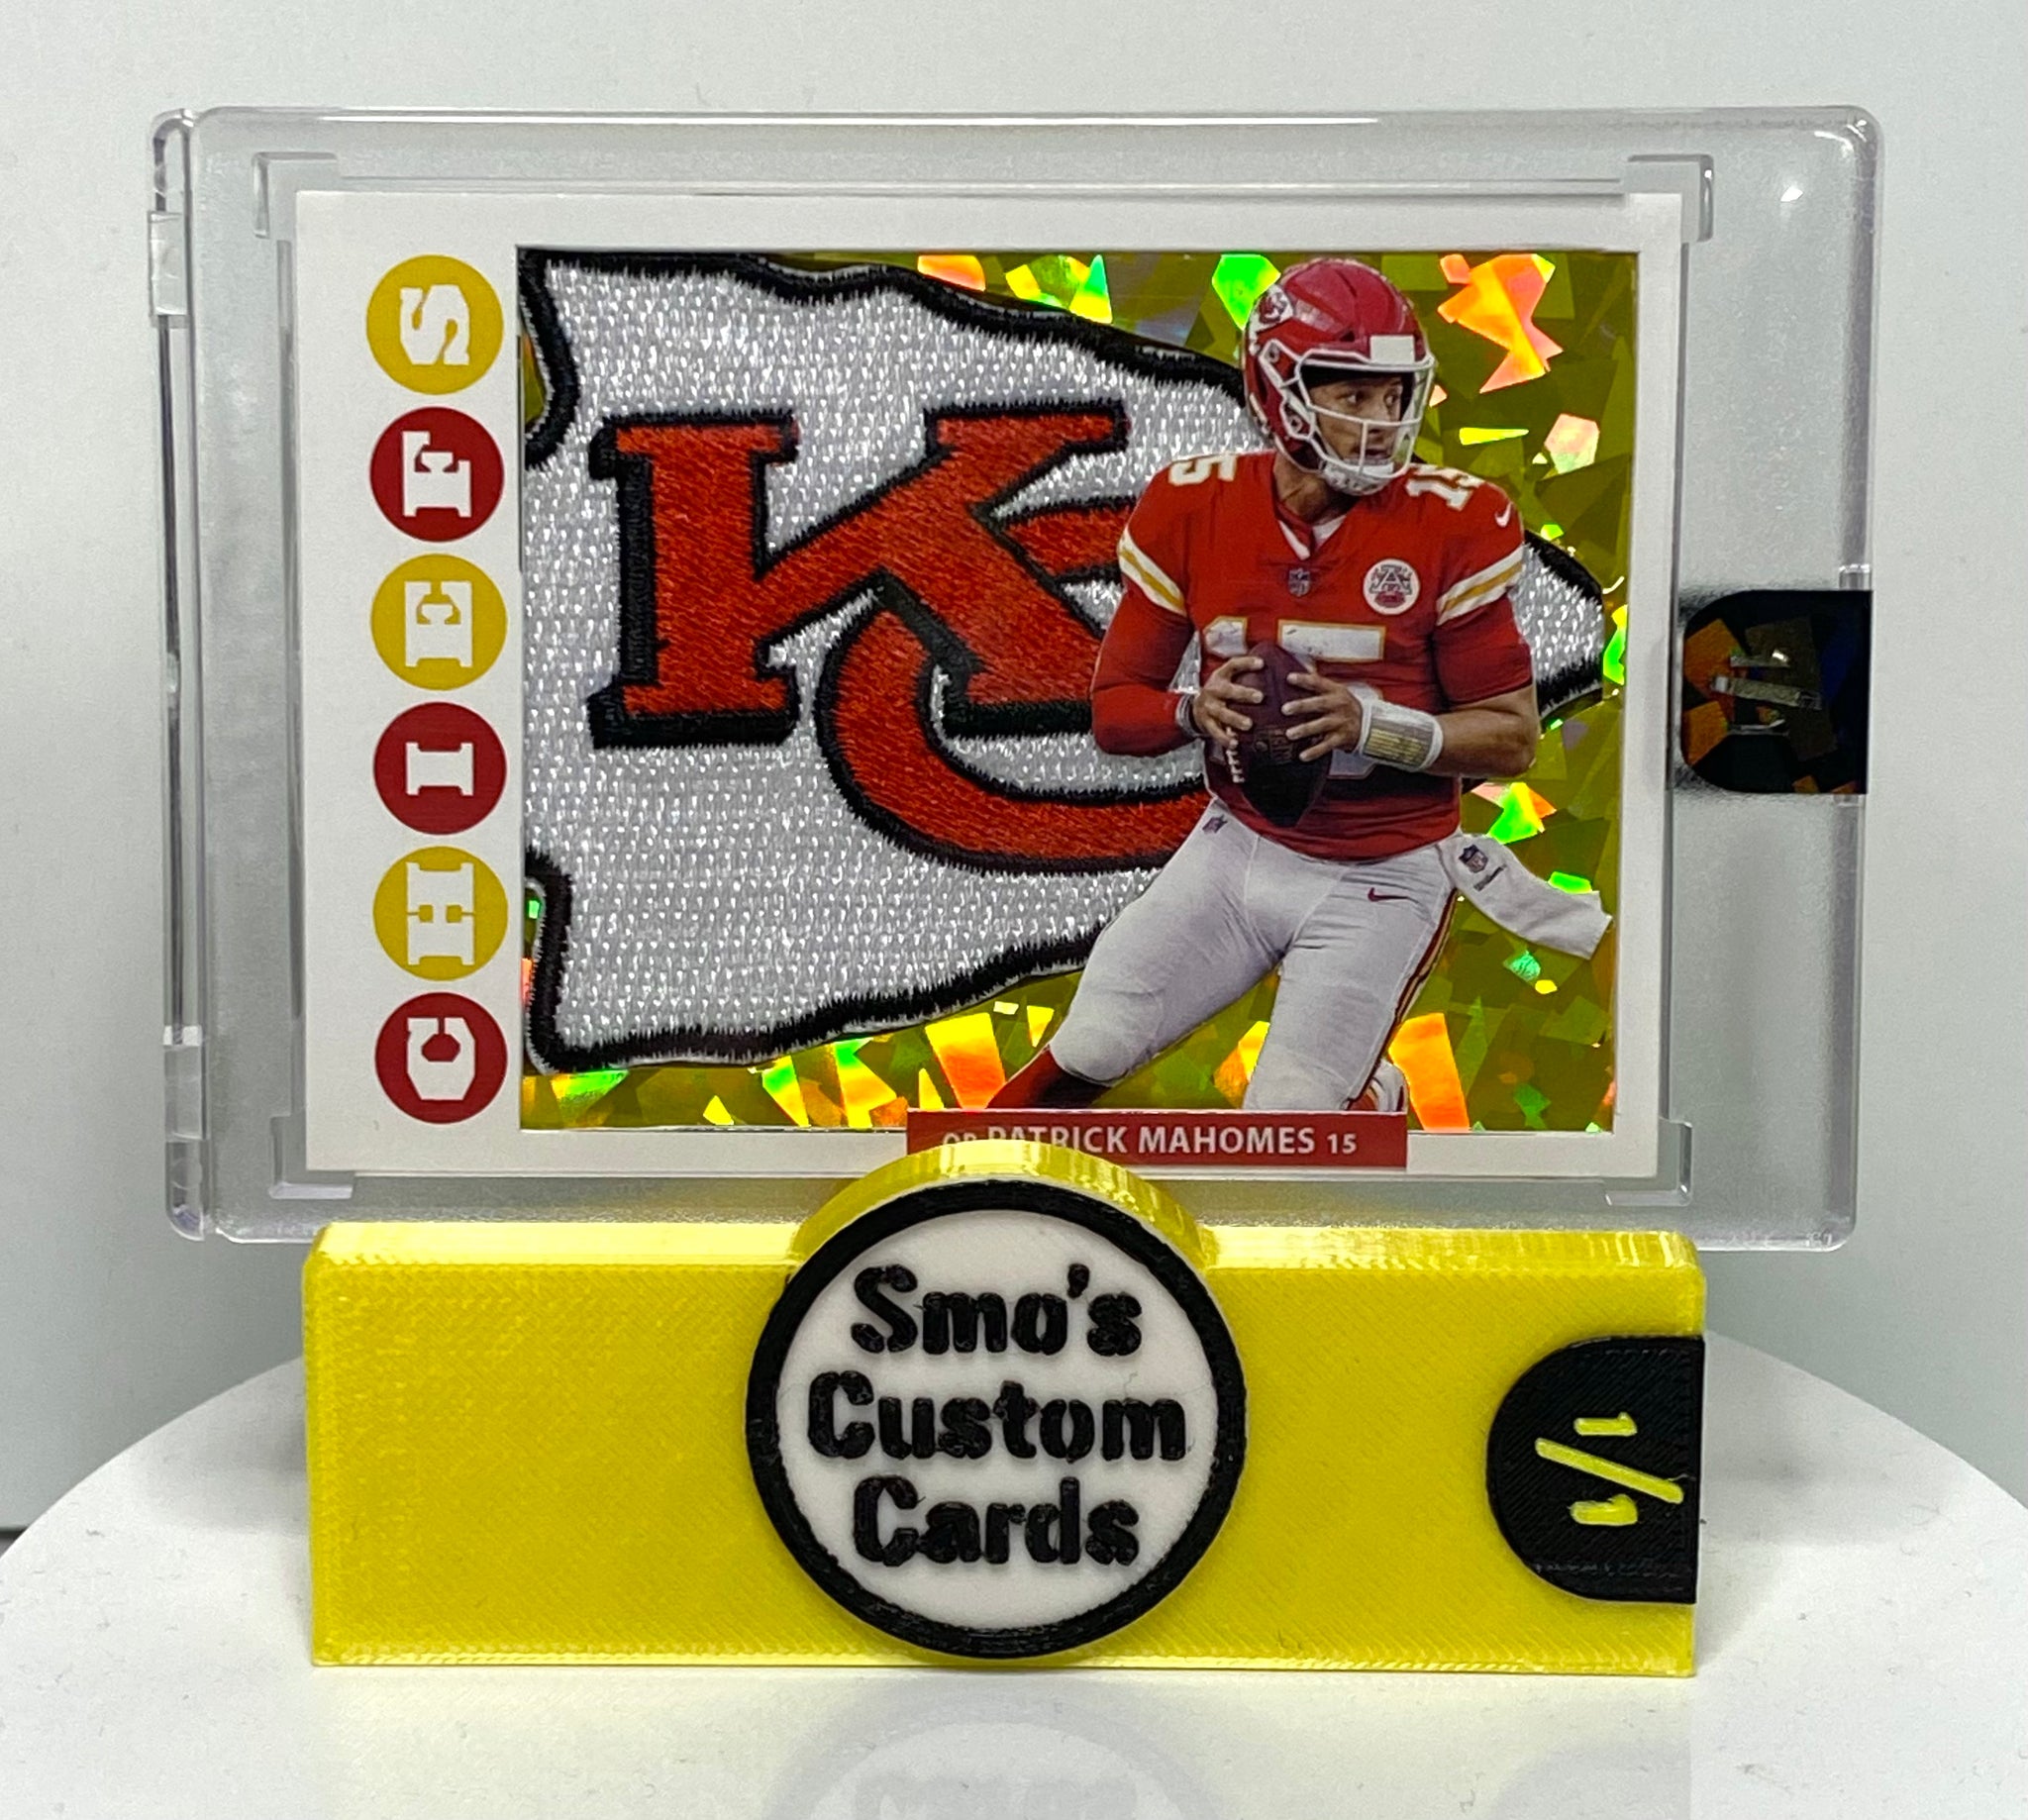 Patrick Mahomes 2008 Topps Throwback Gold Ice Chiefs Patch 1/1